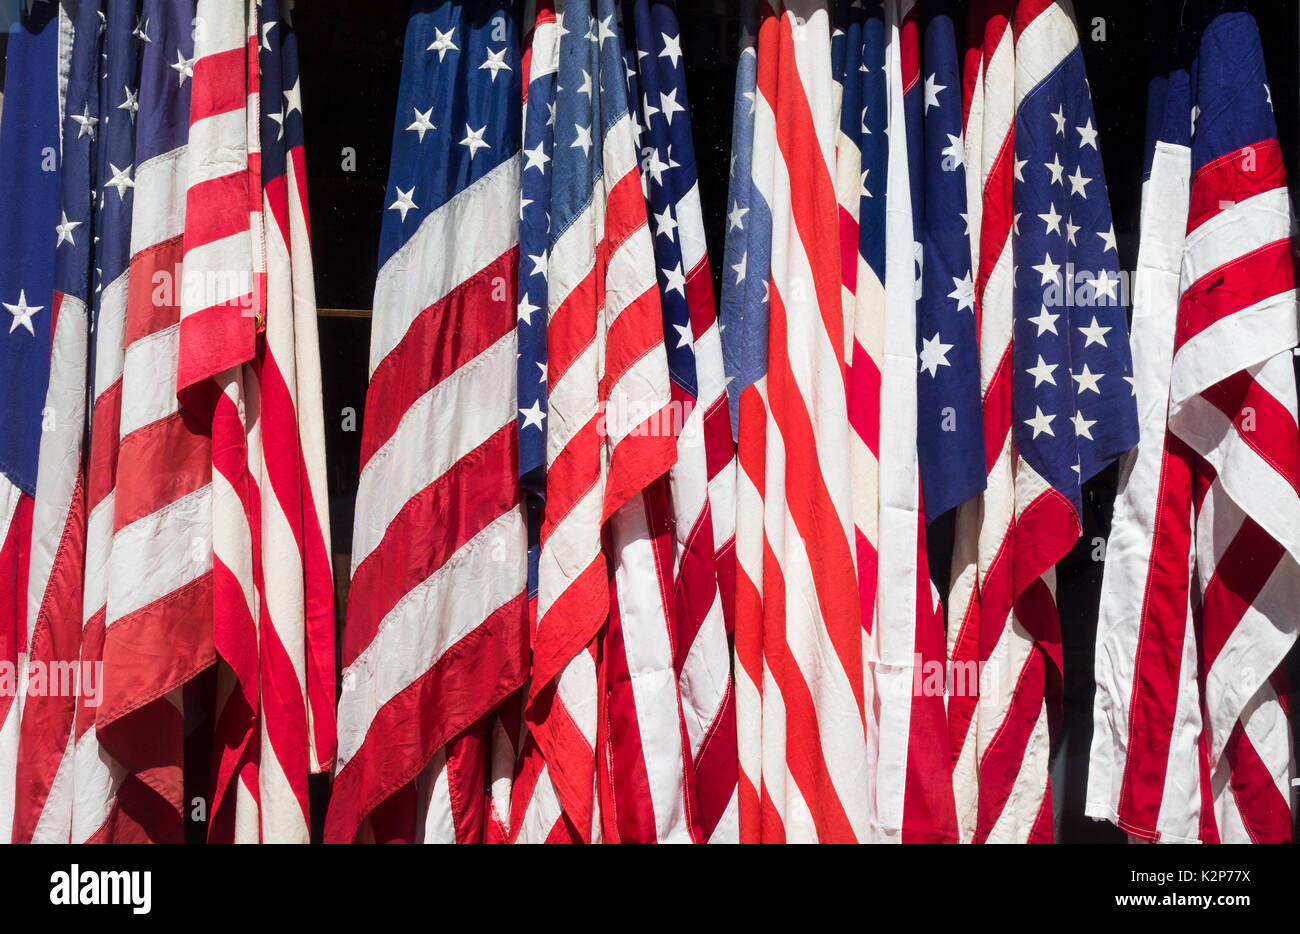 Pre-owned American flags for sale in an antique shop window in the Nollta district of Lower ManhattanAmerica Stock Photo